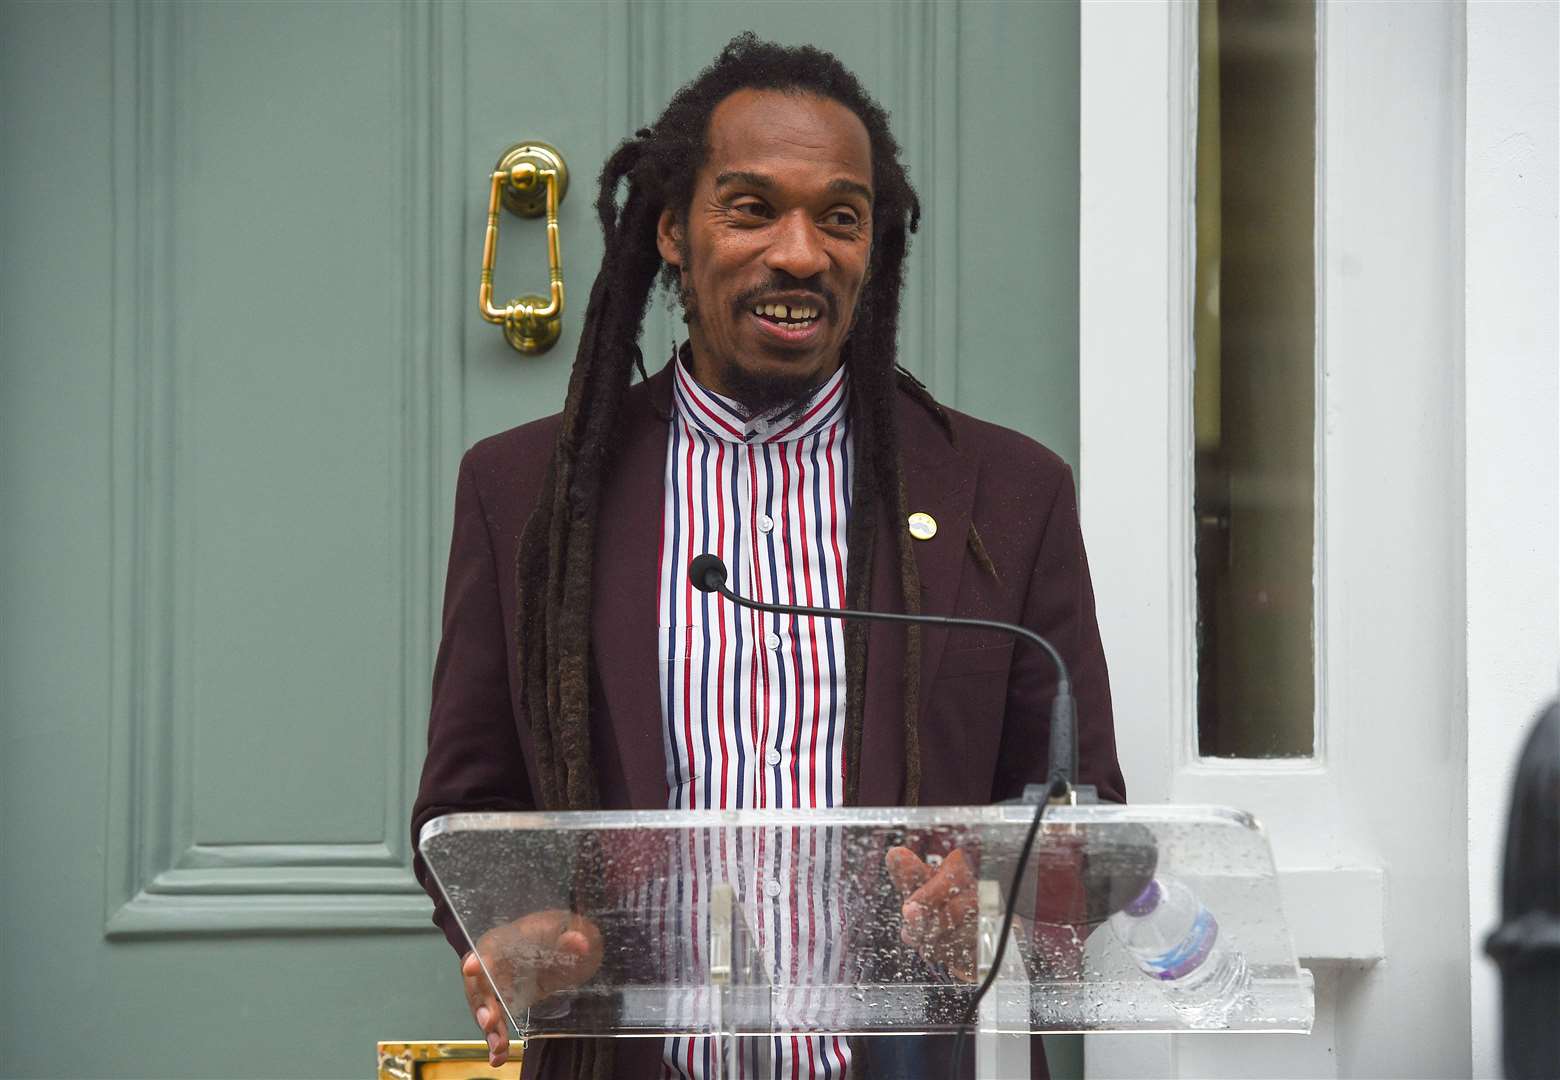 Poet Benjamin Zephaniah declined an OBE due to its association with empire and slavery (Kirsty O’Connor/PA)